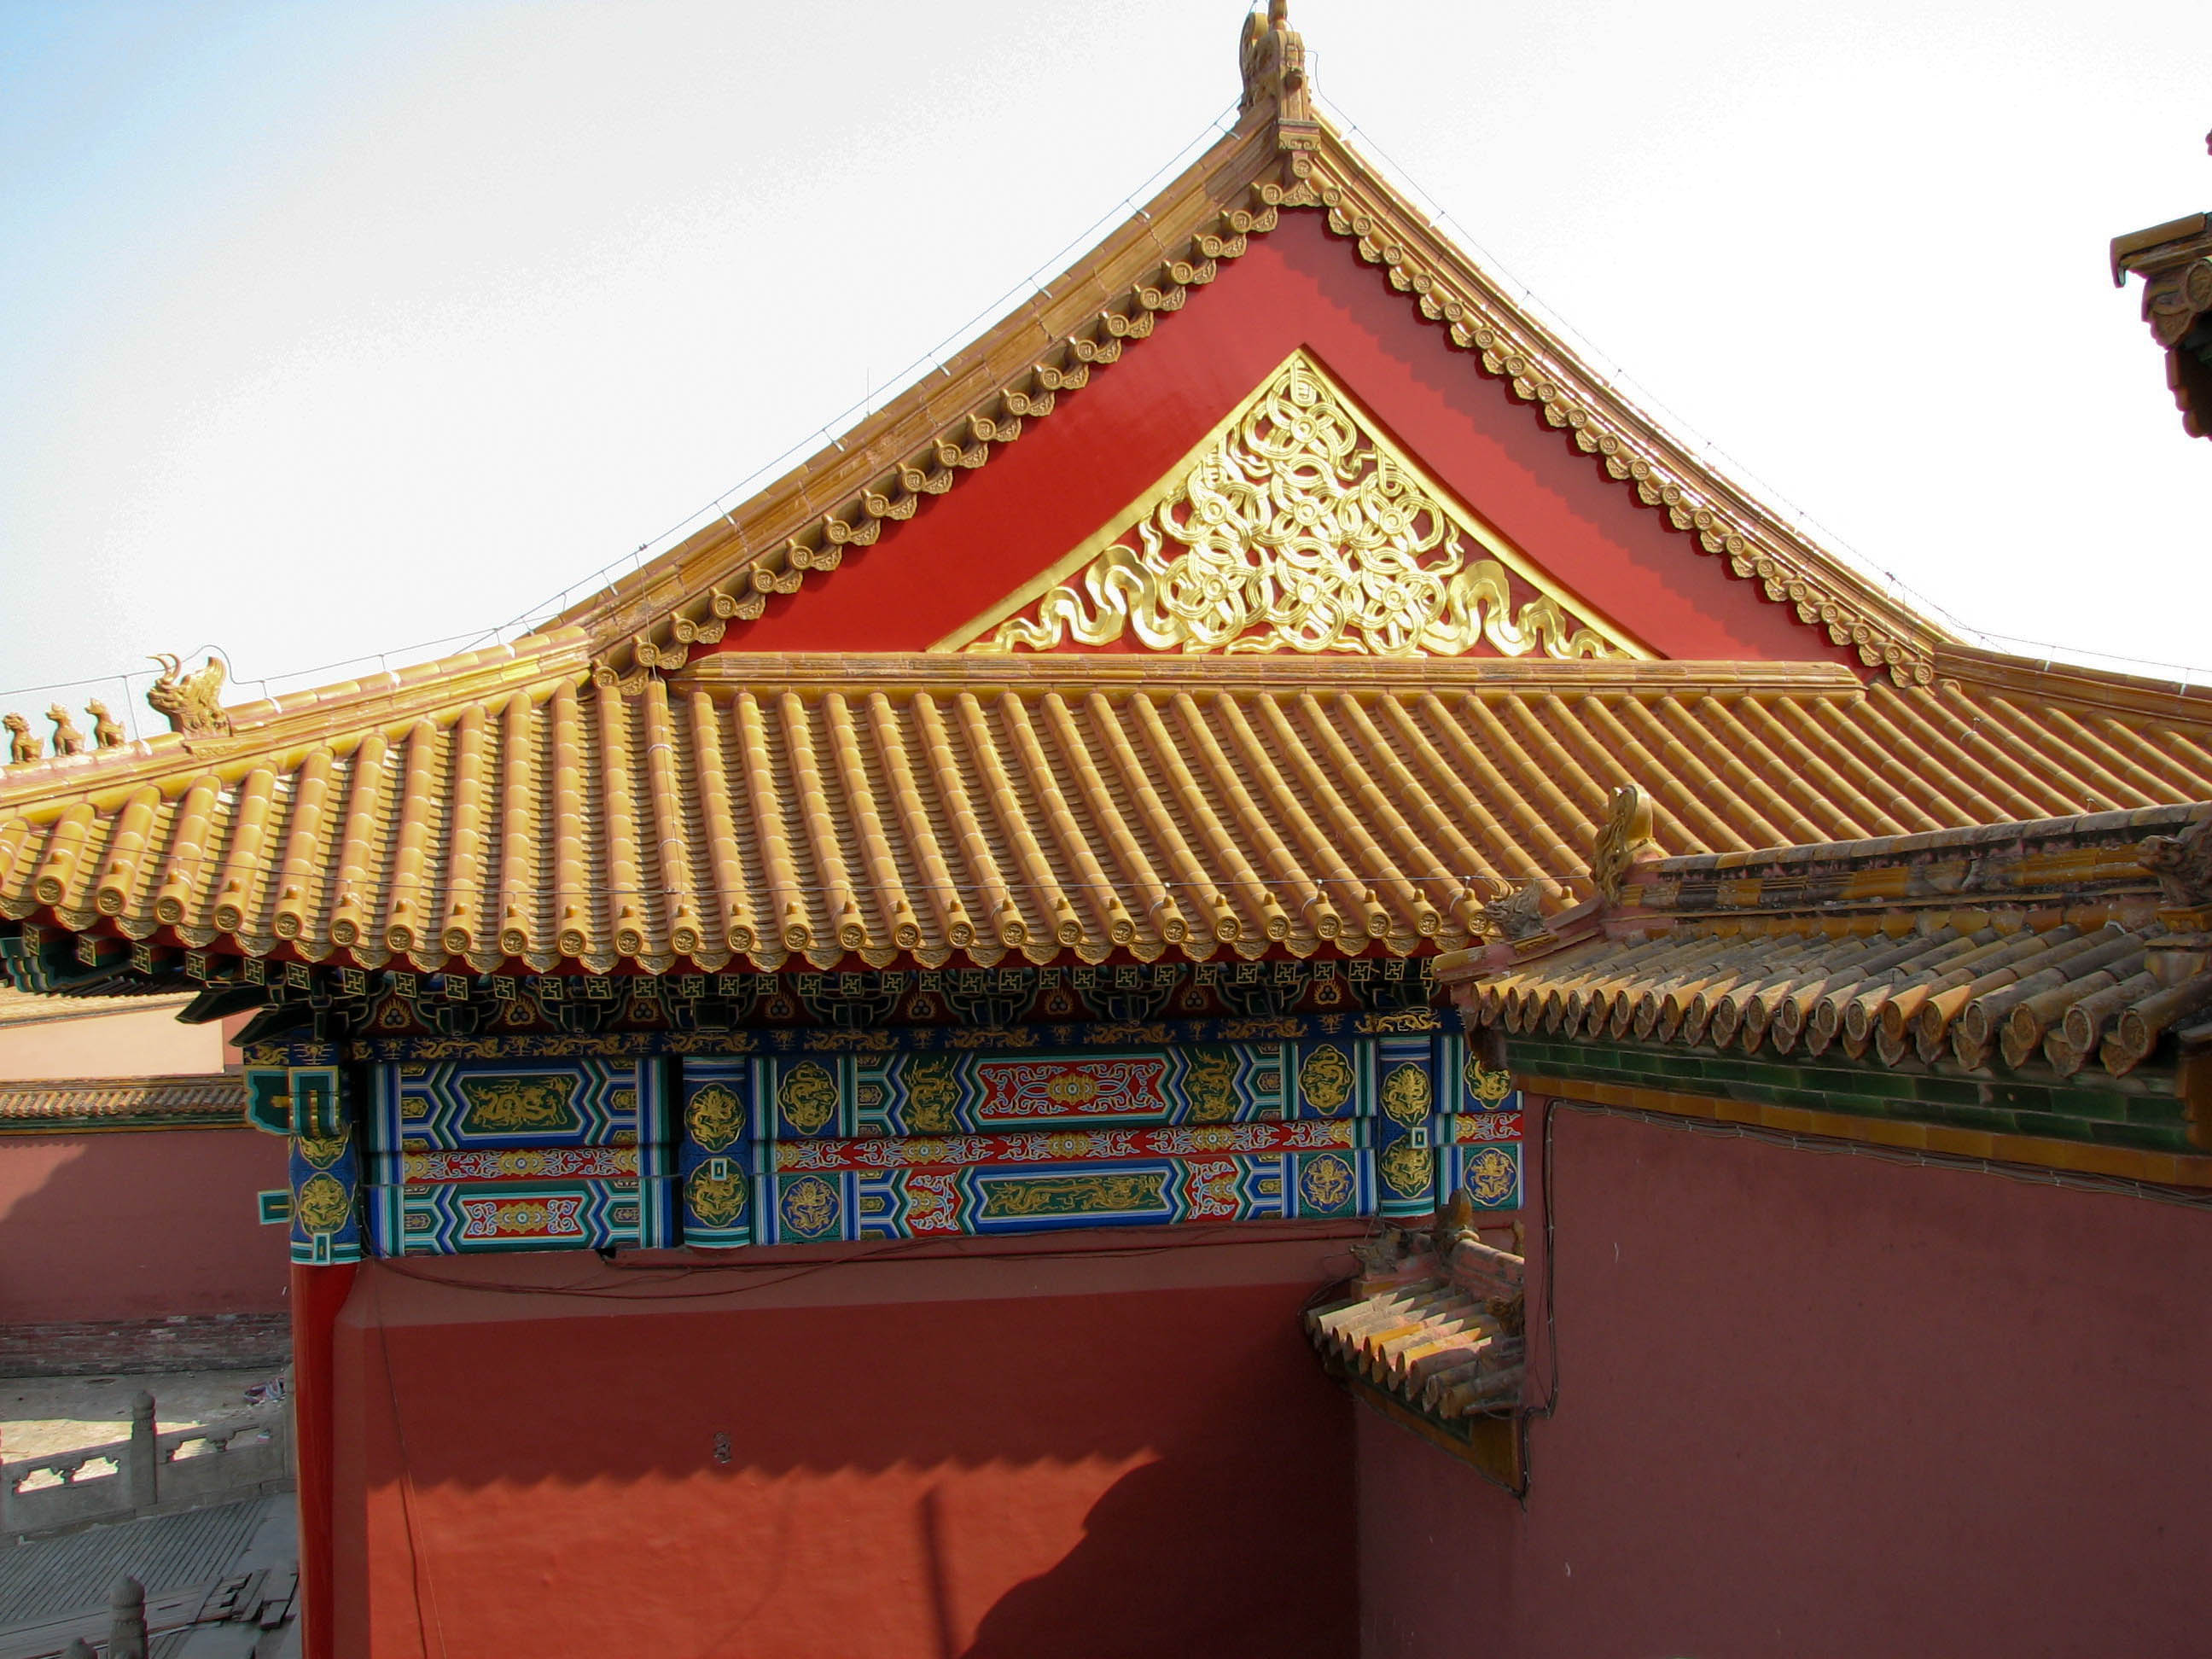 The Forbidden City: Architectural Details | Into the Middle Kingdom